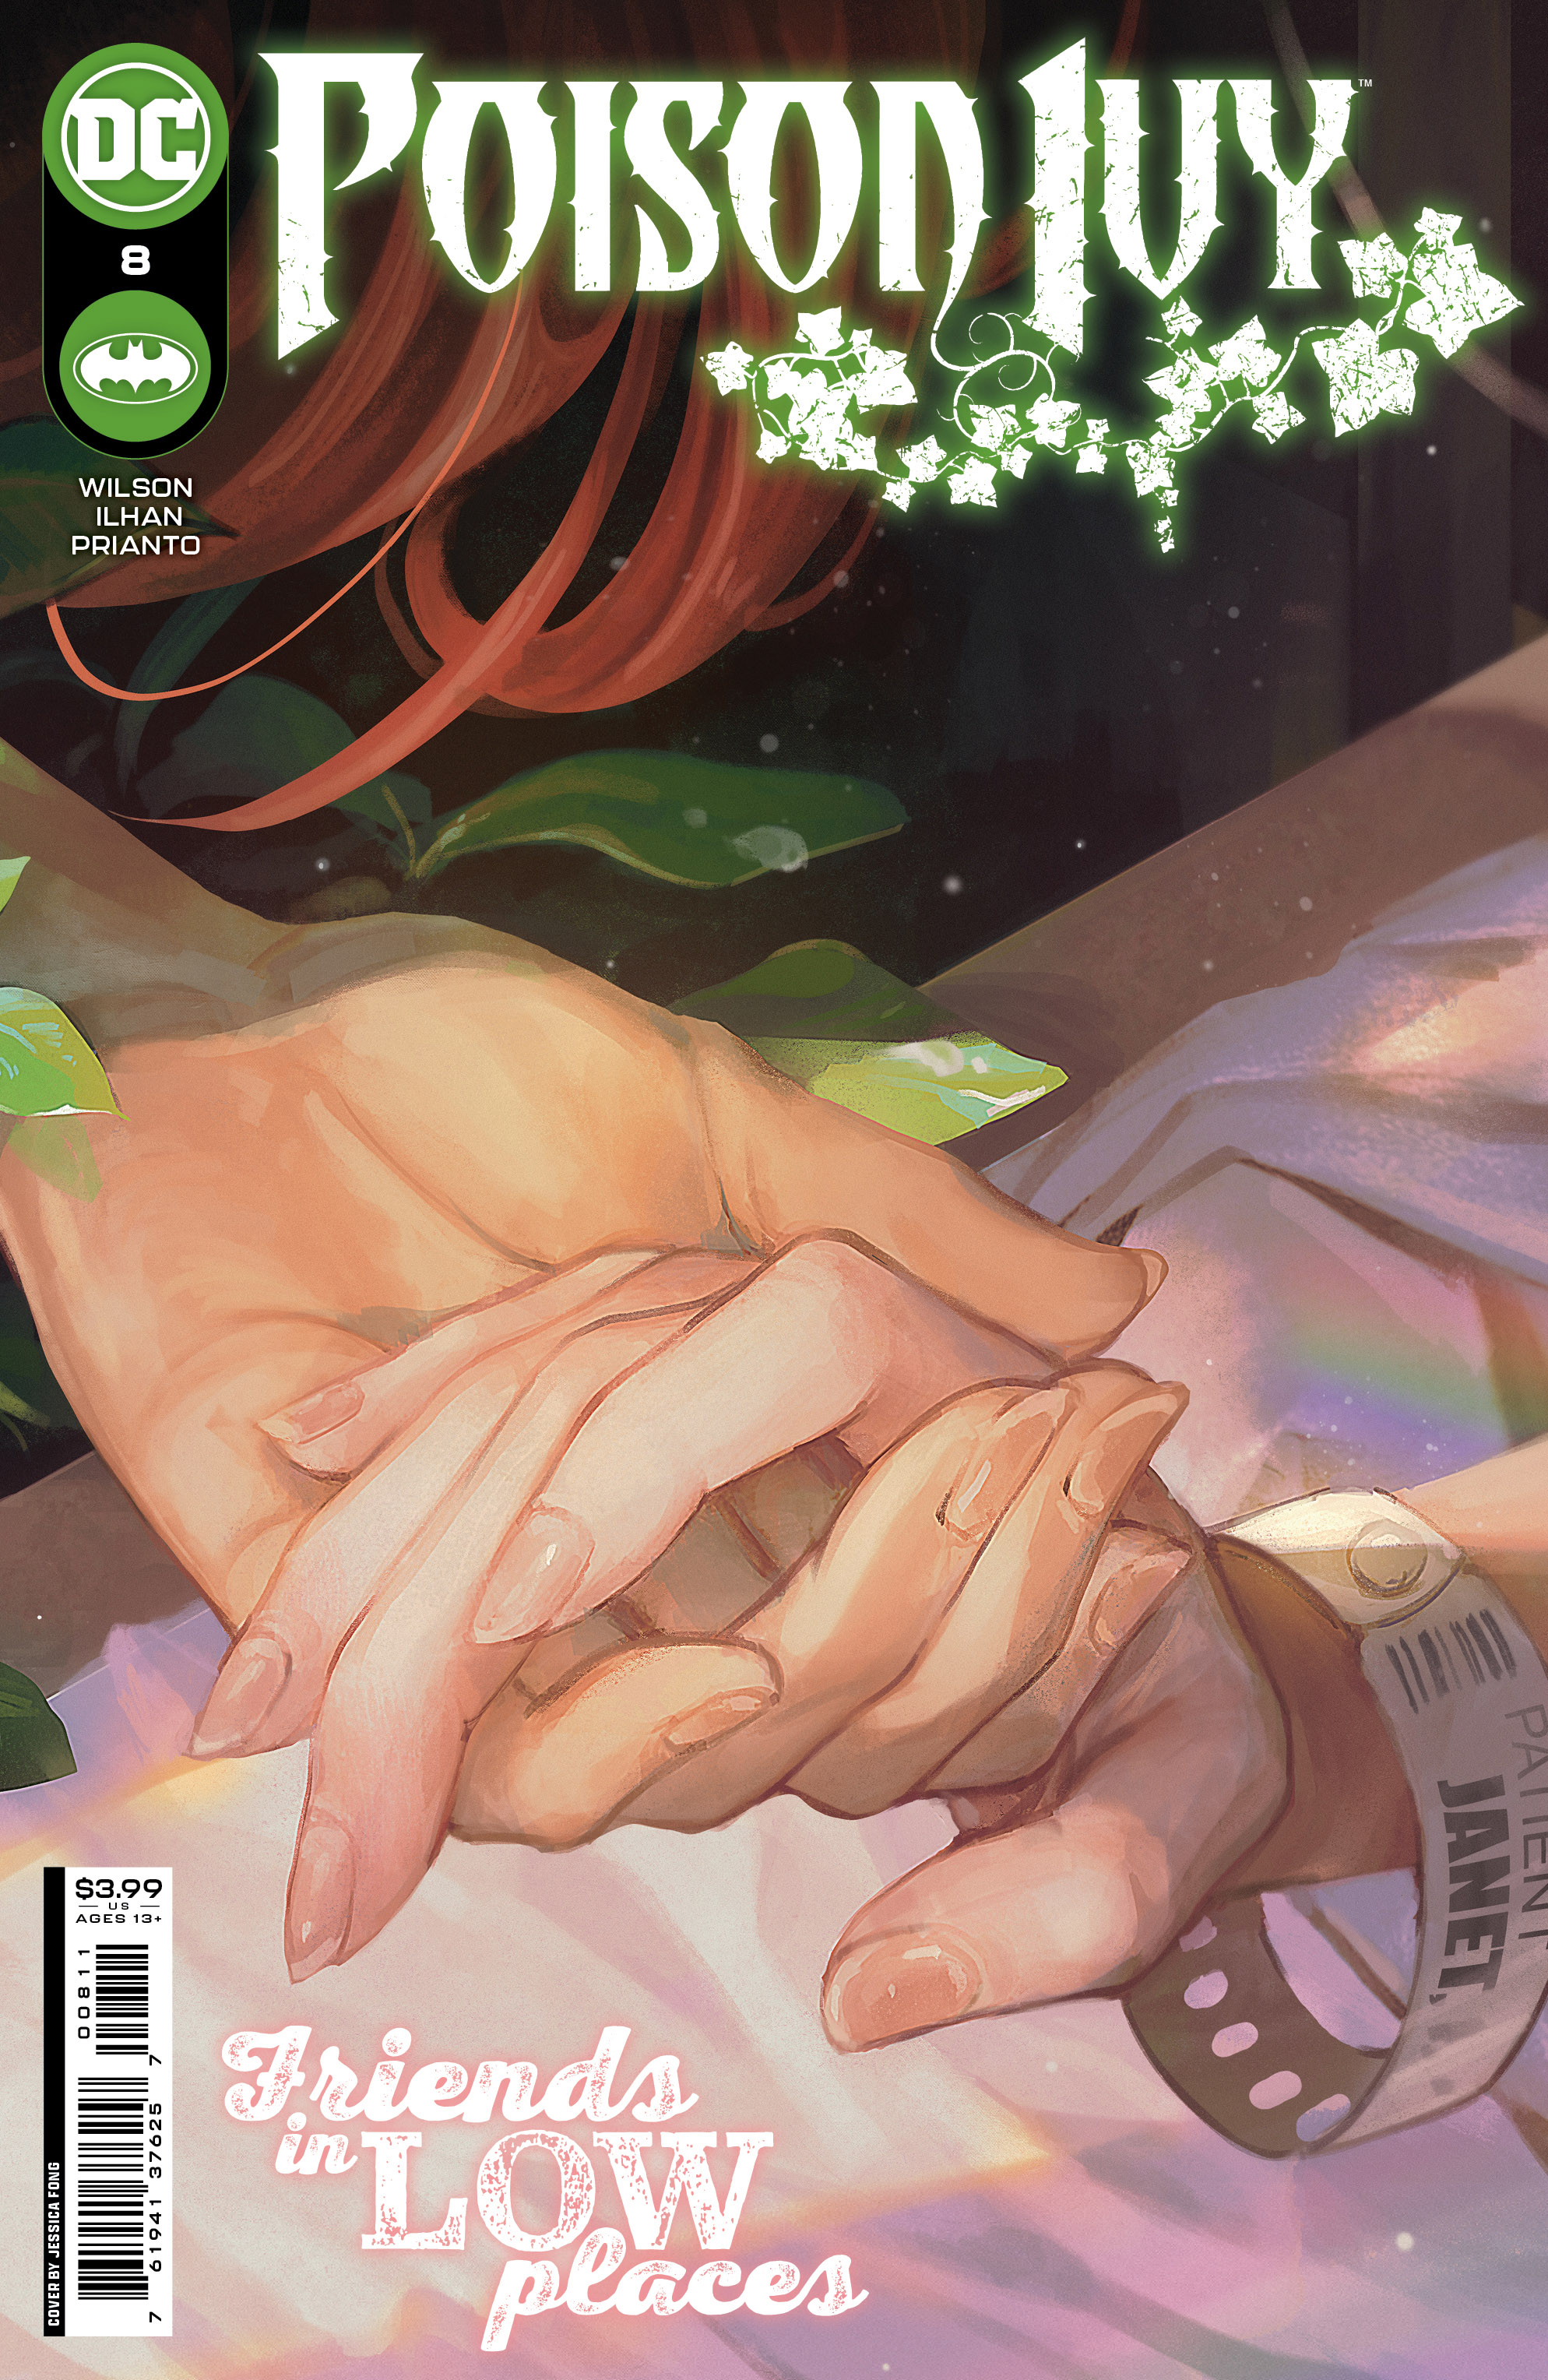 Poison Ivy #8 Cover A Jessica Fong